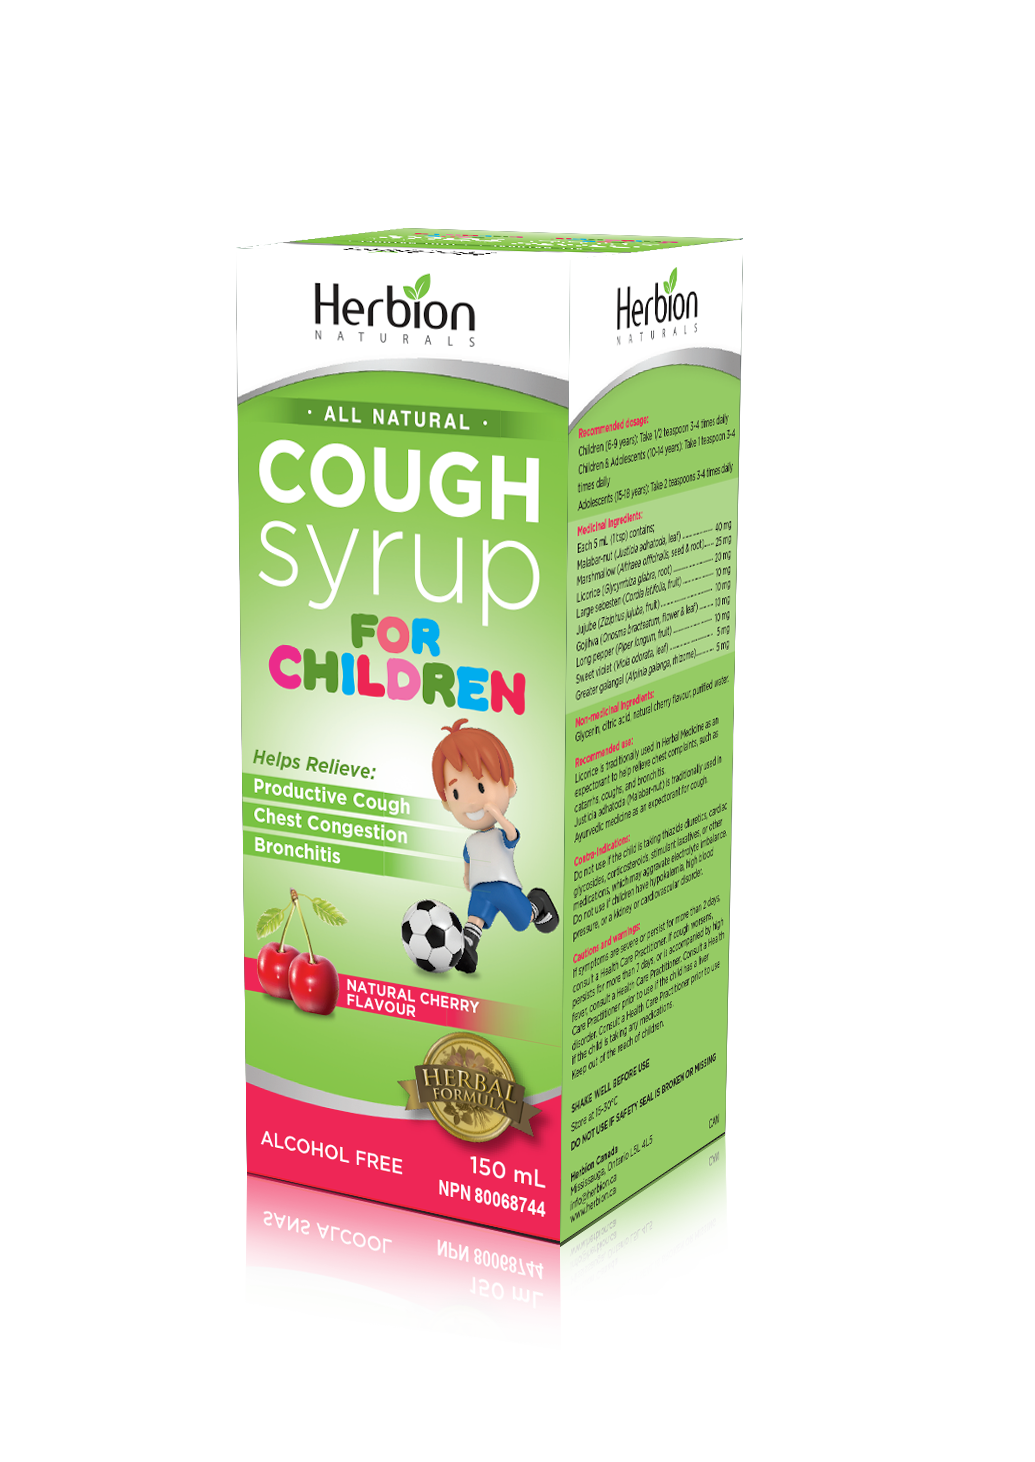 Herbion Cough Syrup for Chilldren